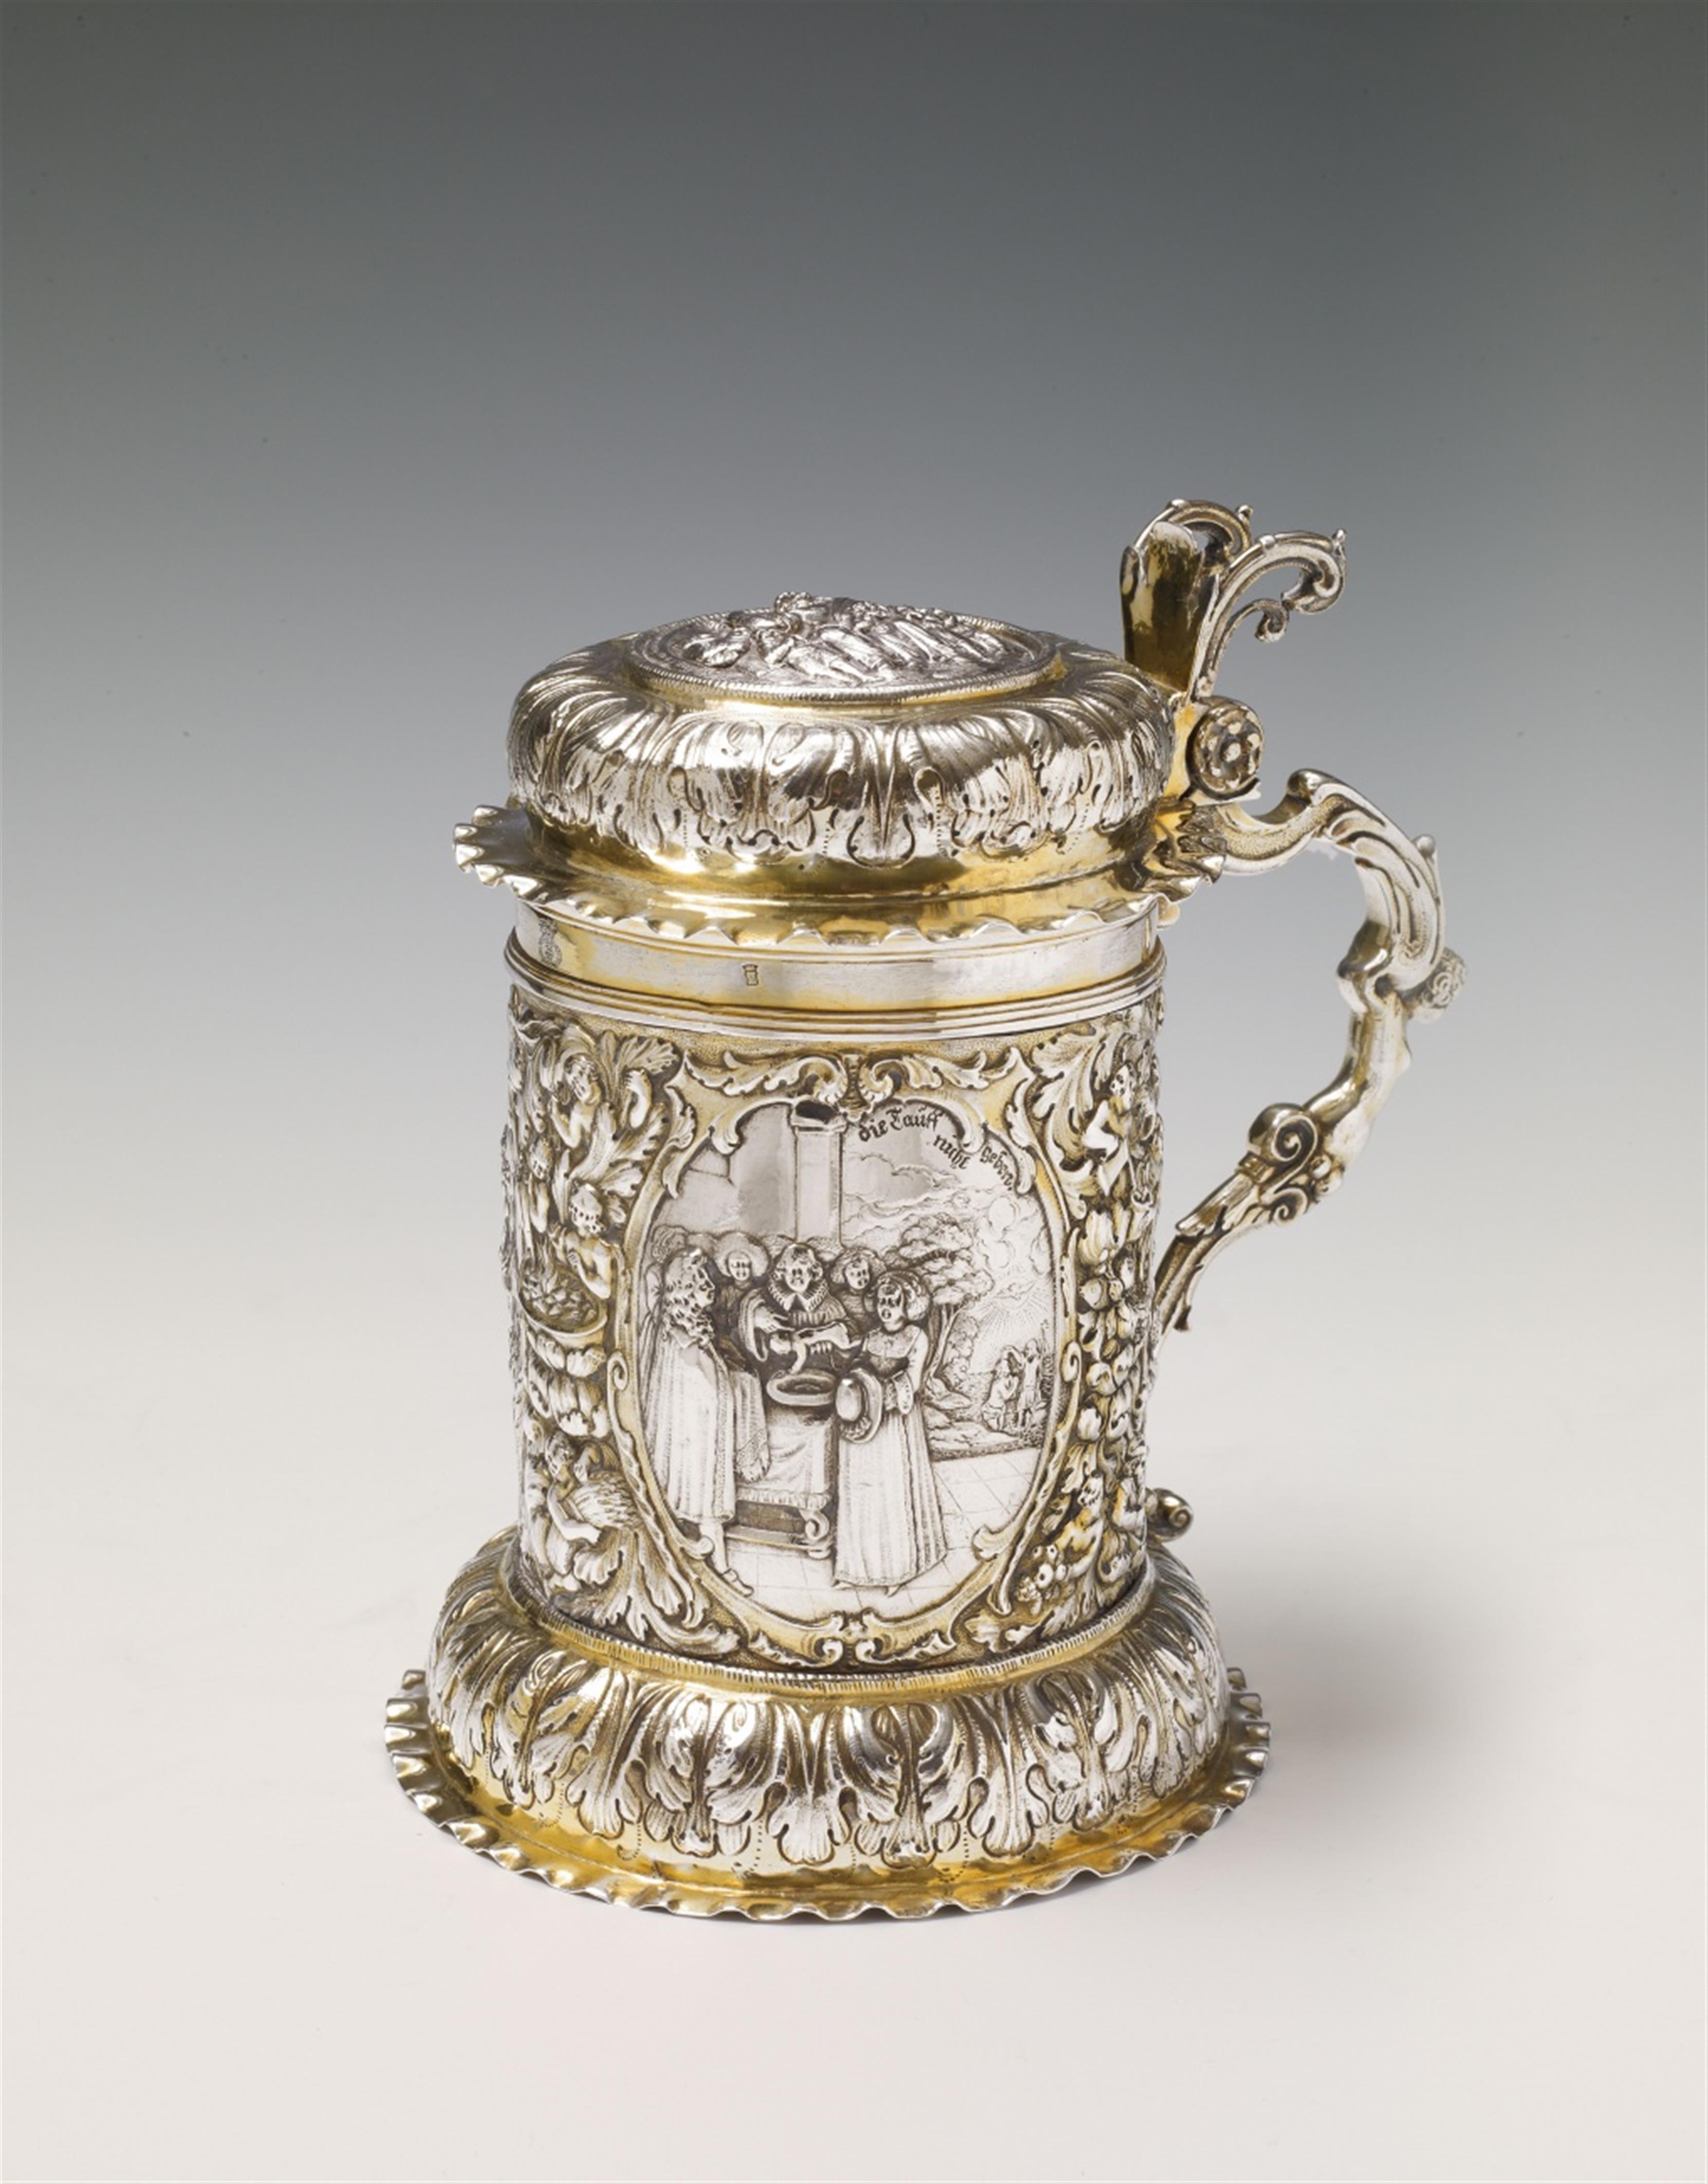 A Nuremberg silver gilt tankard. Of cylindrical form on a bulbous base, the rim moulded and the volute handle decorated with a female herm. The body engraved and embossed with biblical scenes in three oval reserves: 1. The creation of Eve, 2. The annuncia - image-3